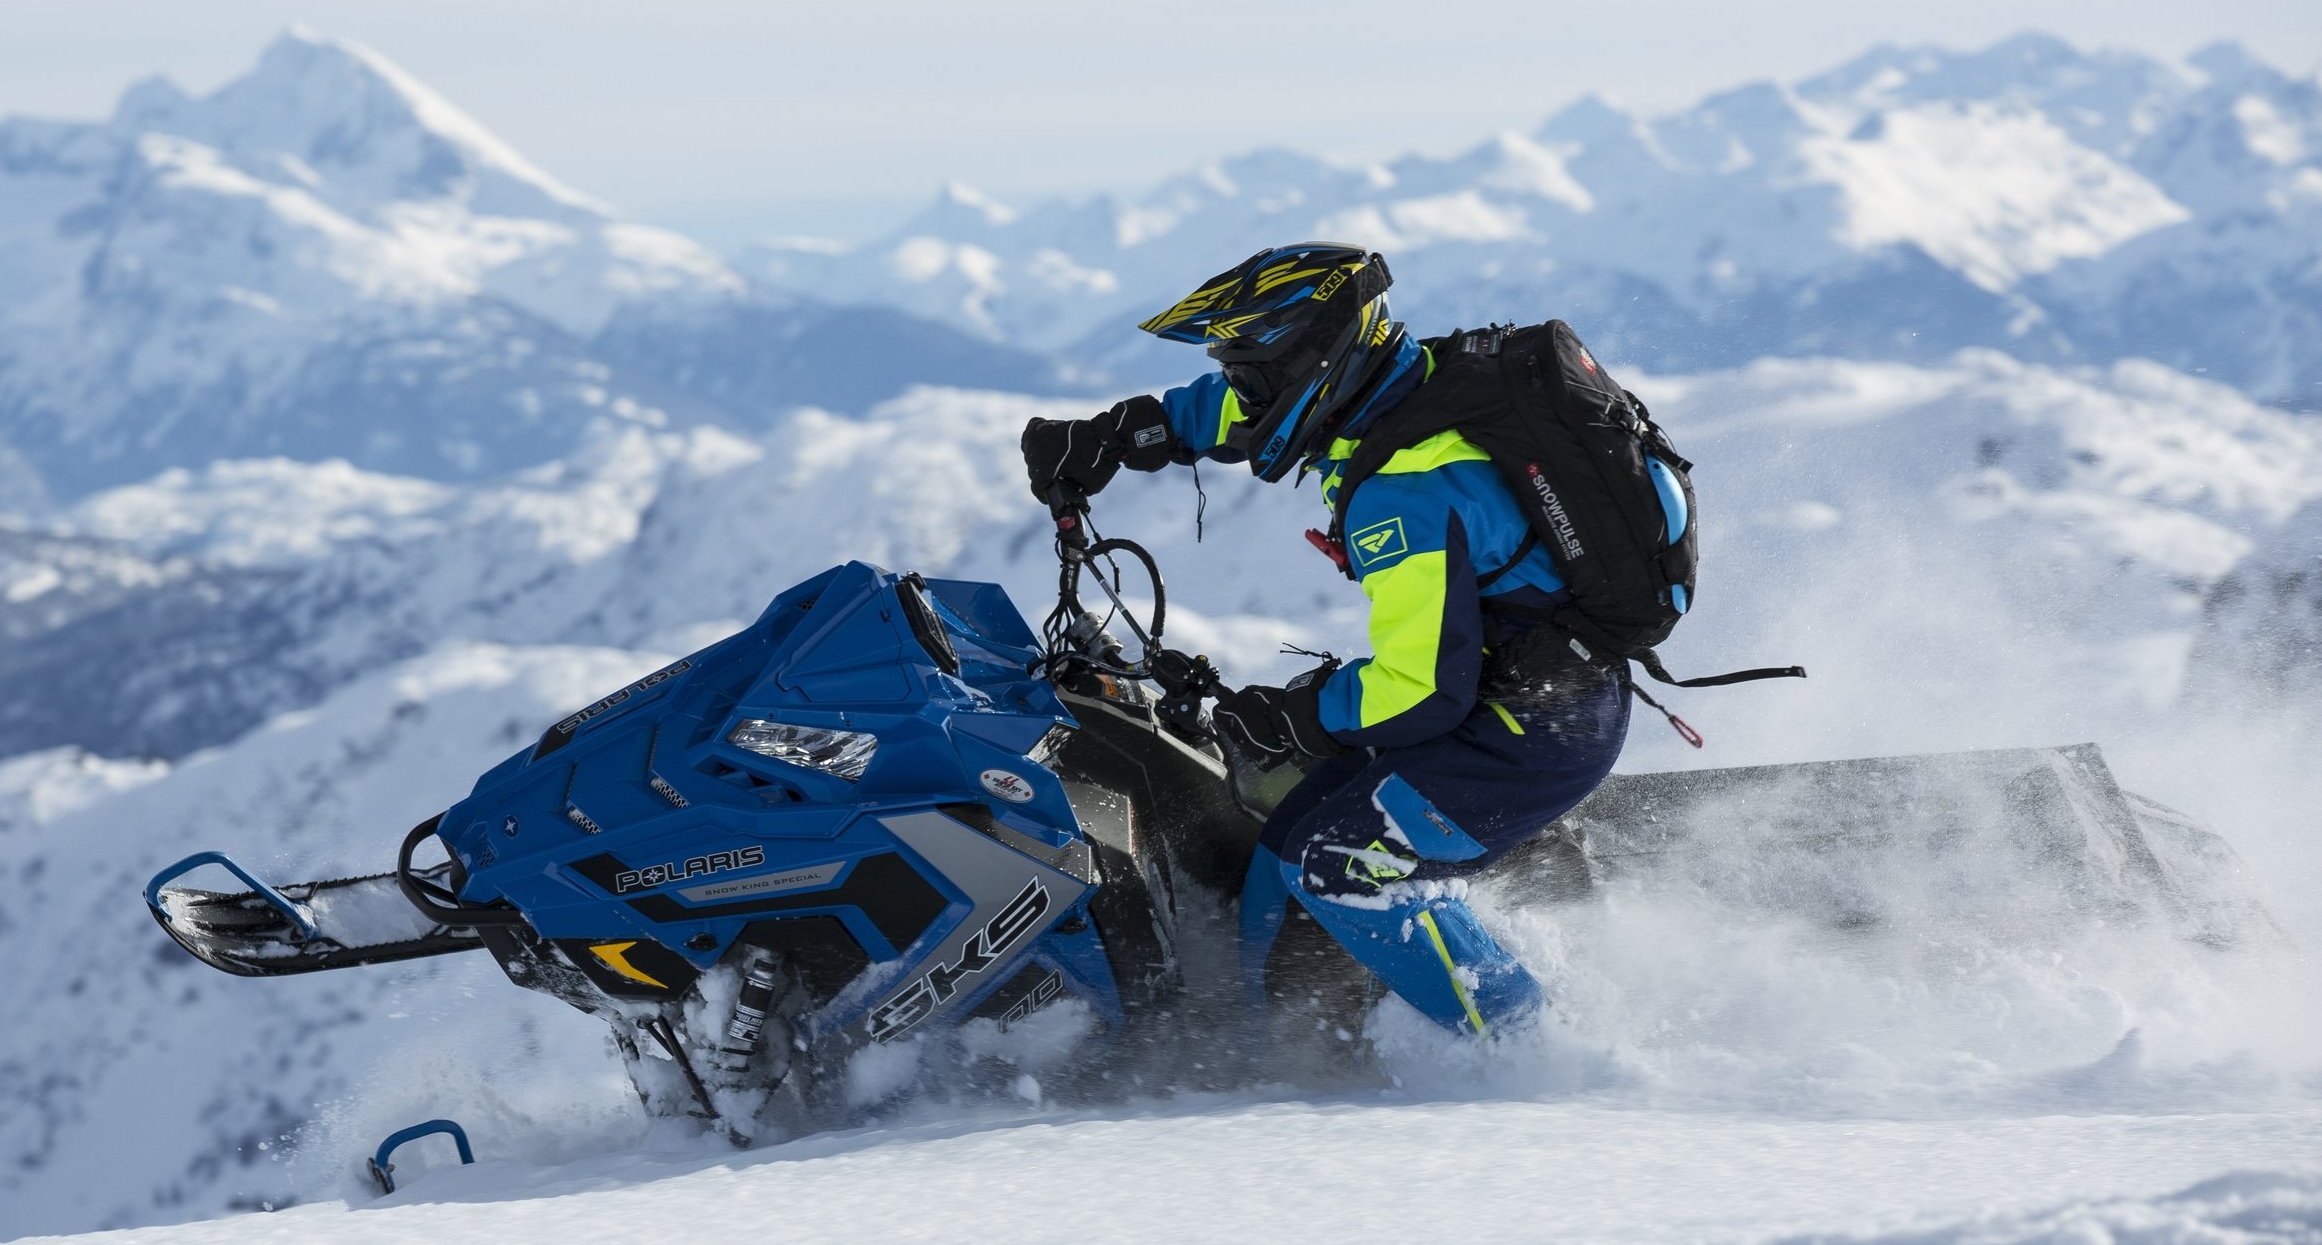  Got A New Sled?   Get a quote  